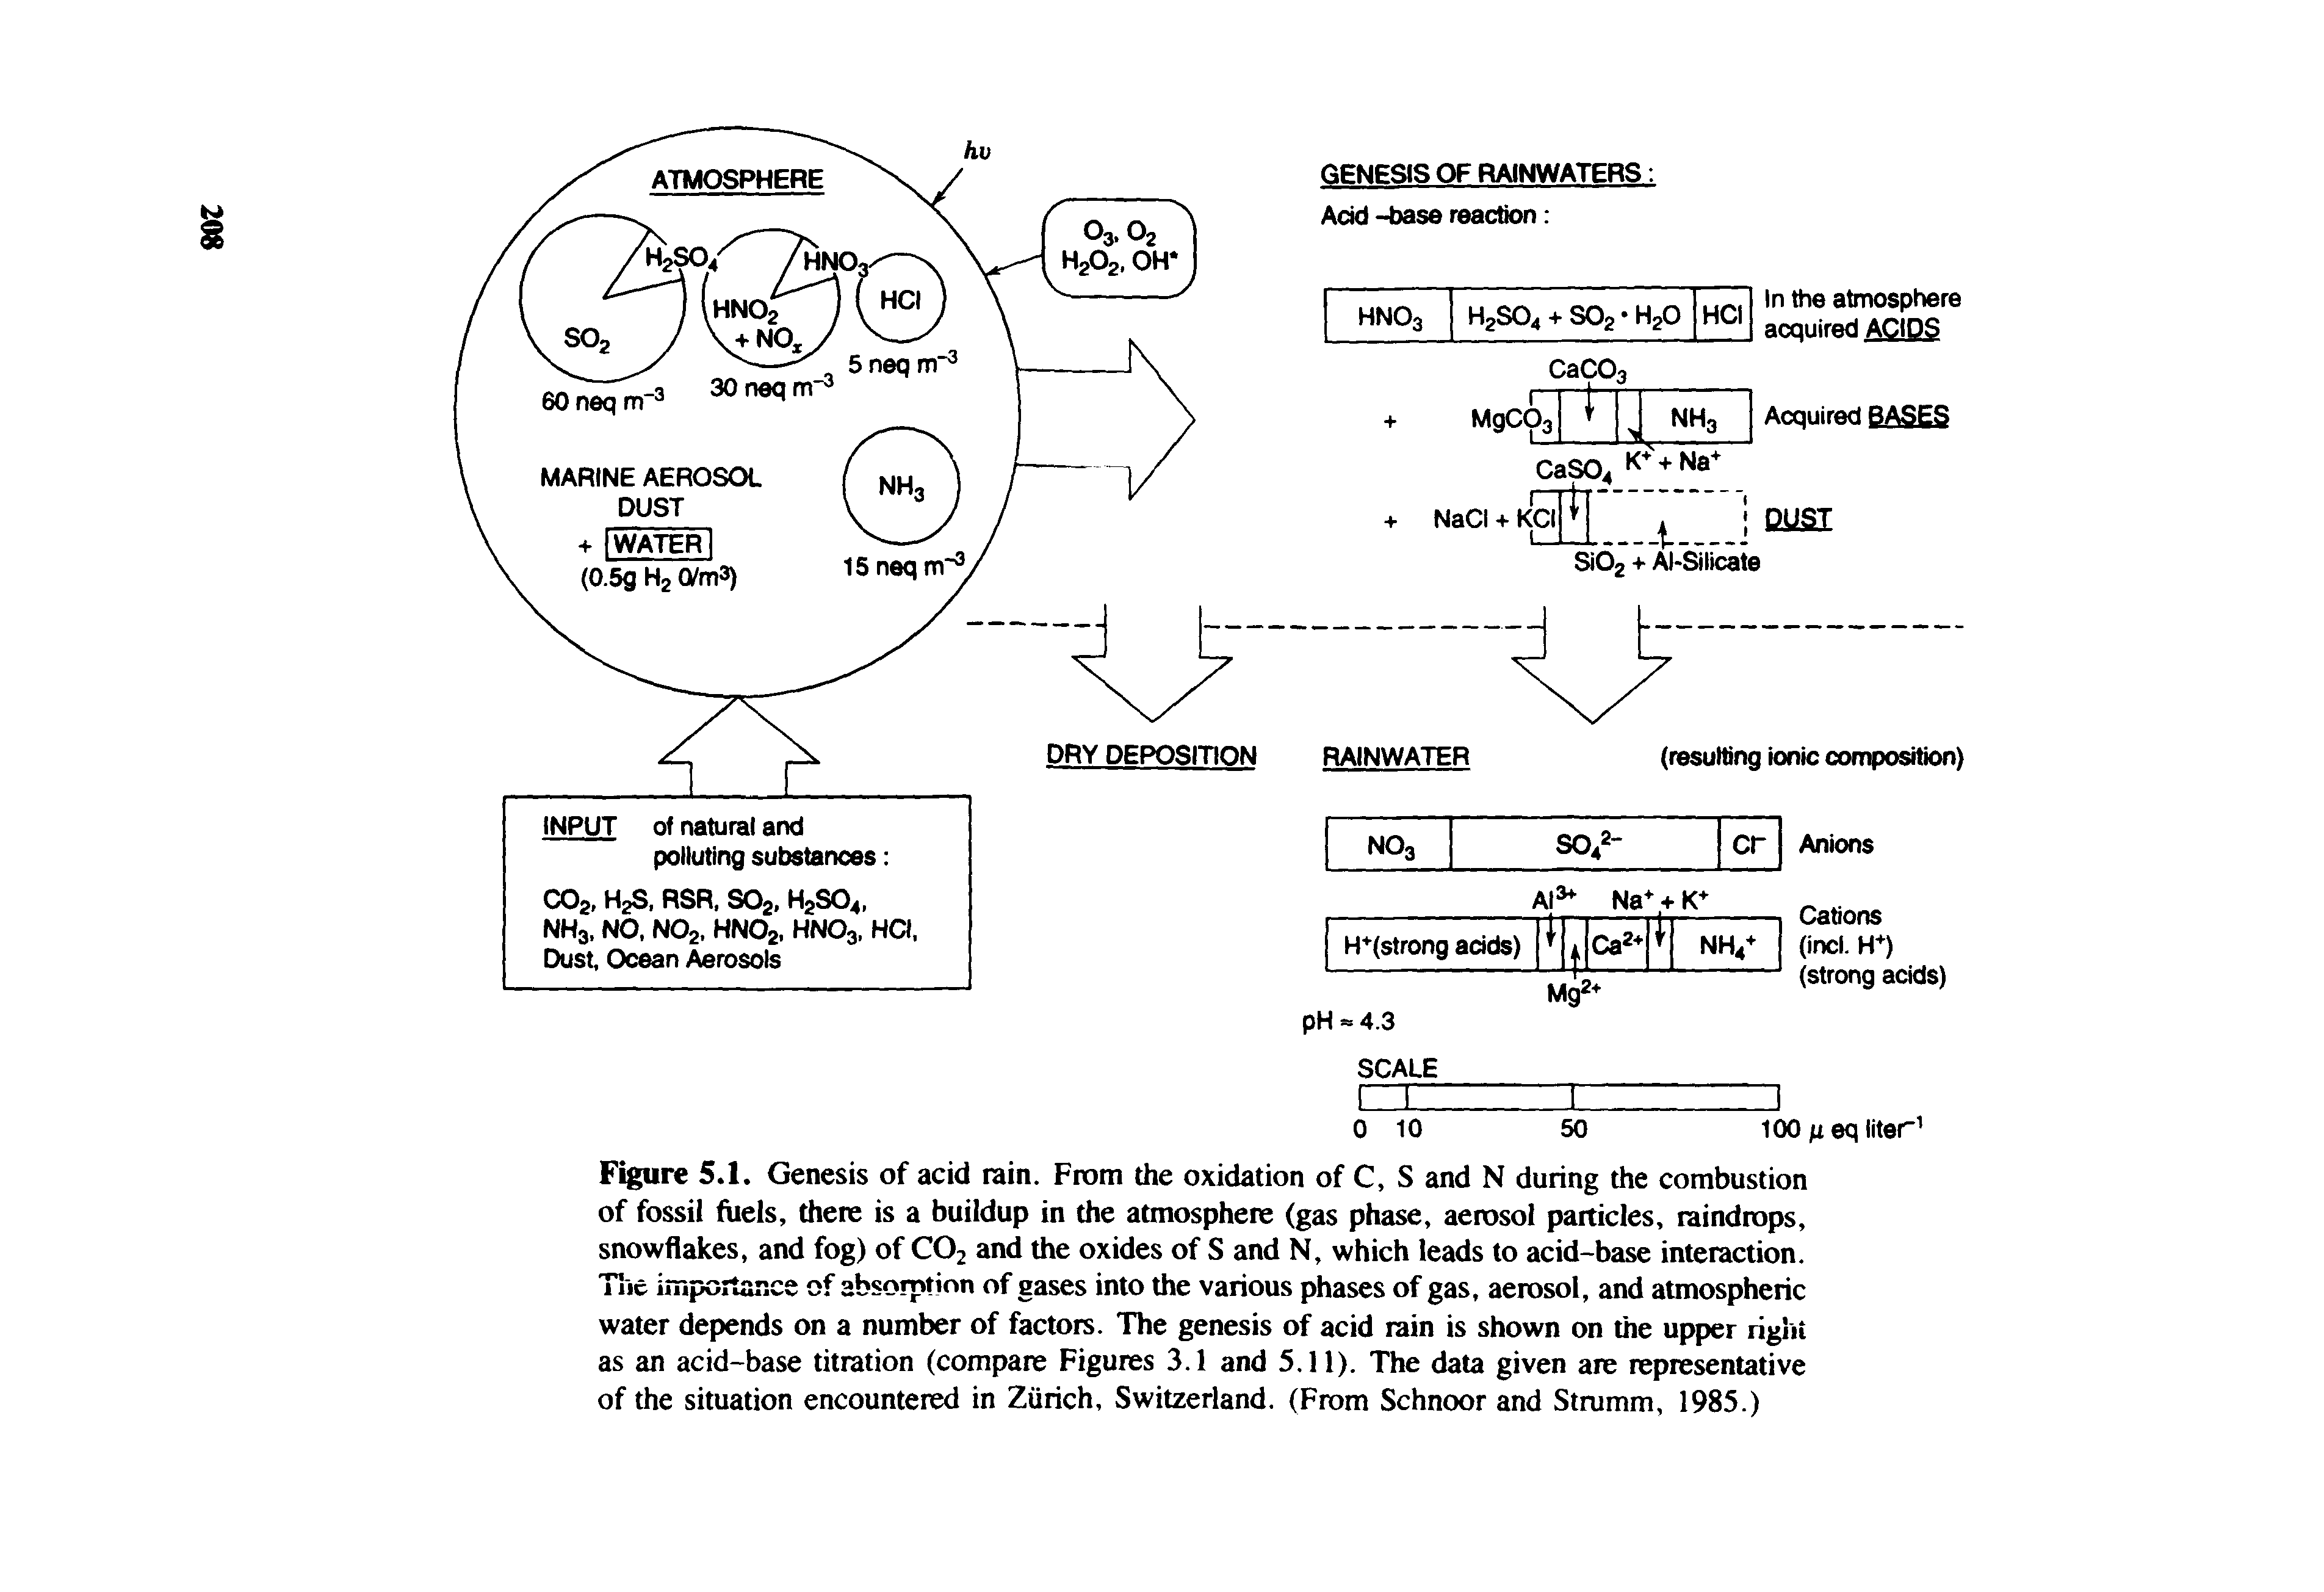 Figure 5.1. Genesis of acid rain. From the oxidation of C, S and N during the combustion of fossil fuels, there is a buildup in the atmosphere (gas phase, aerosol particles, raindrops, snowflakes, and fog) of CO2 and the oxides of S and N, which leads to acid-base interaction.